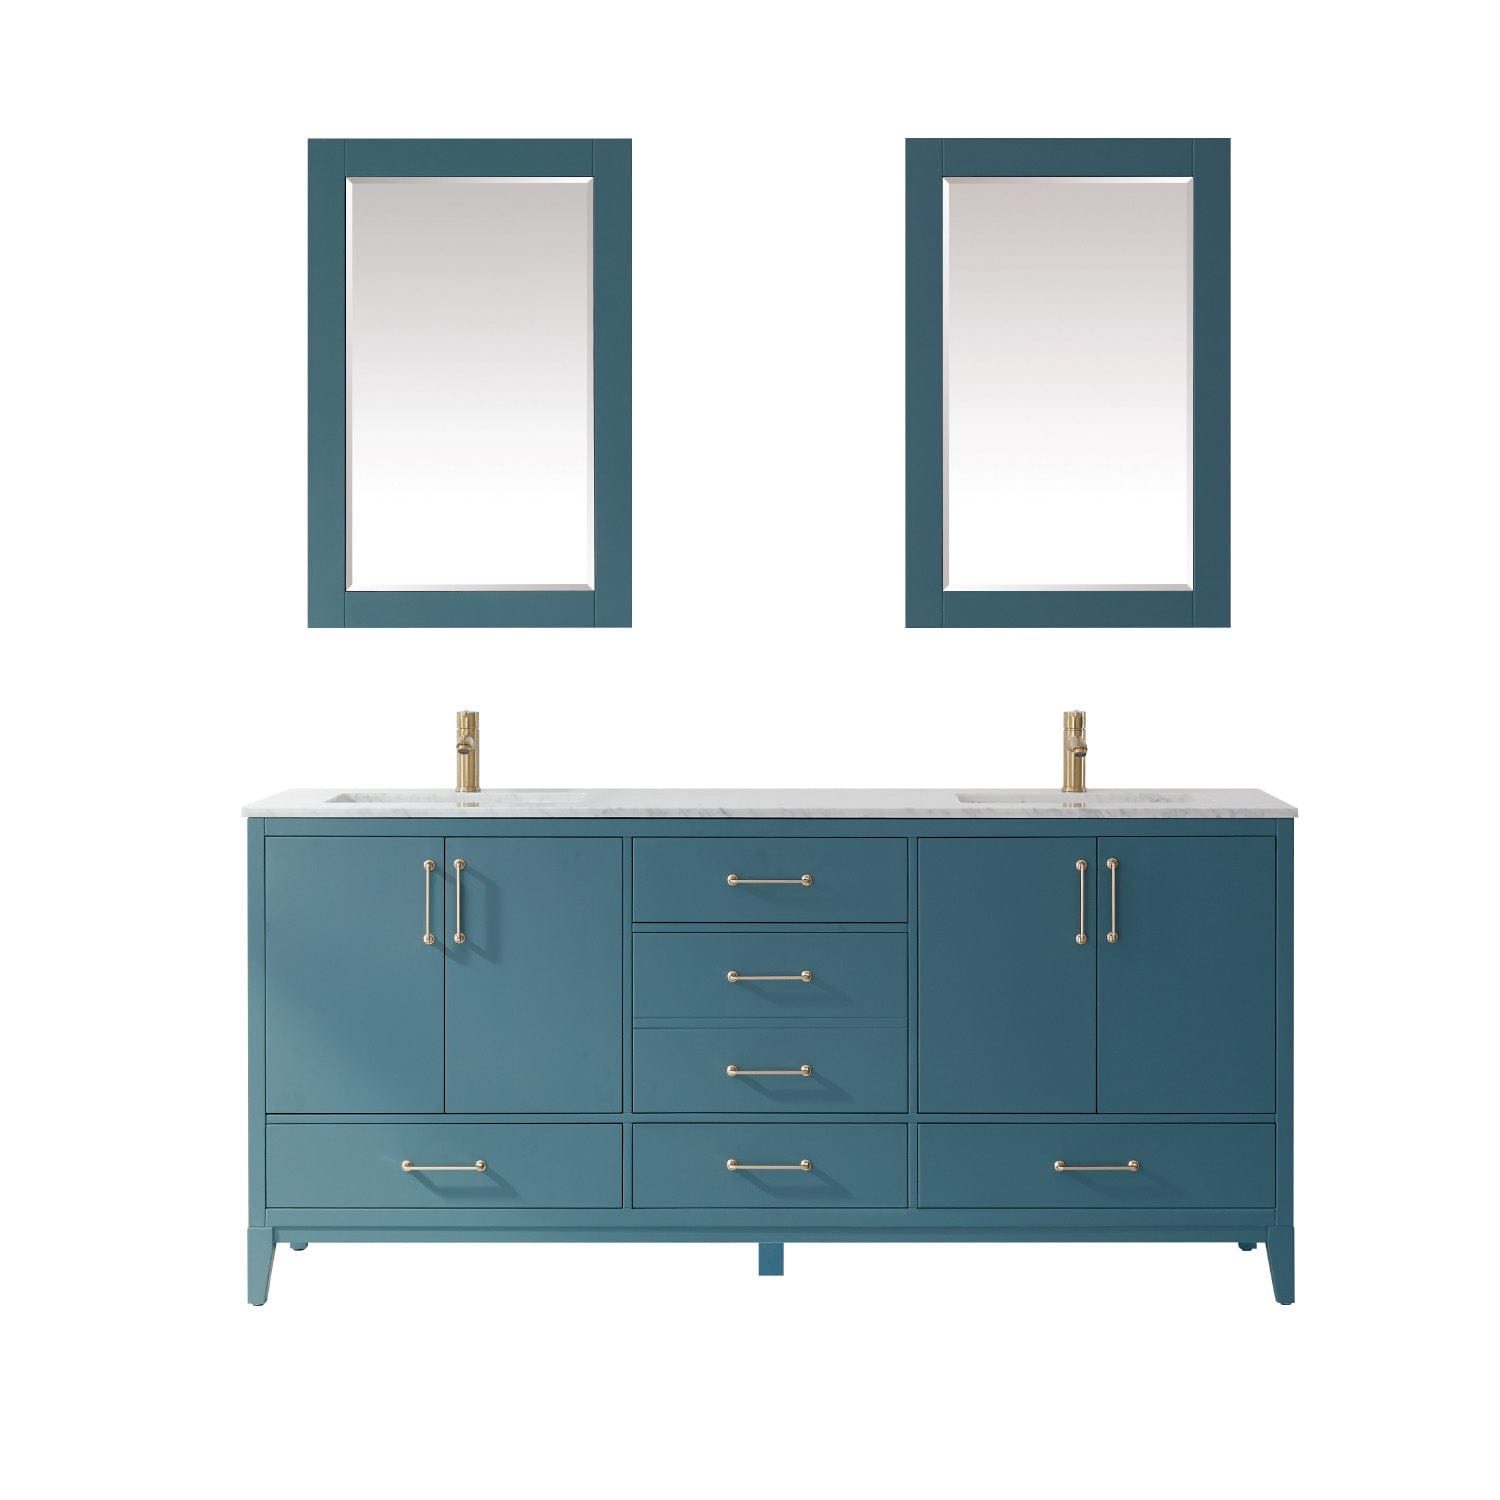 Altair Sutton 72" Double Bathroom Vanity Set in Royal Green and Carrara White Marble Countertop with Mirror 541072-RG-CA - Molaix631112972017Vanity541072-RG-CA